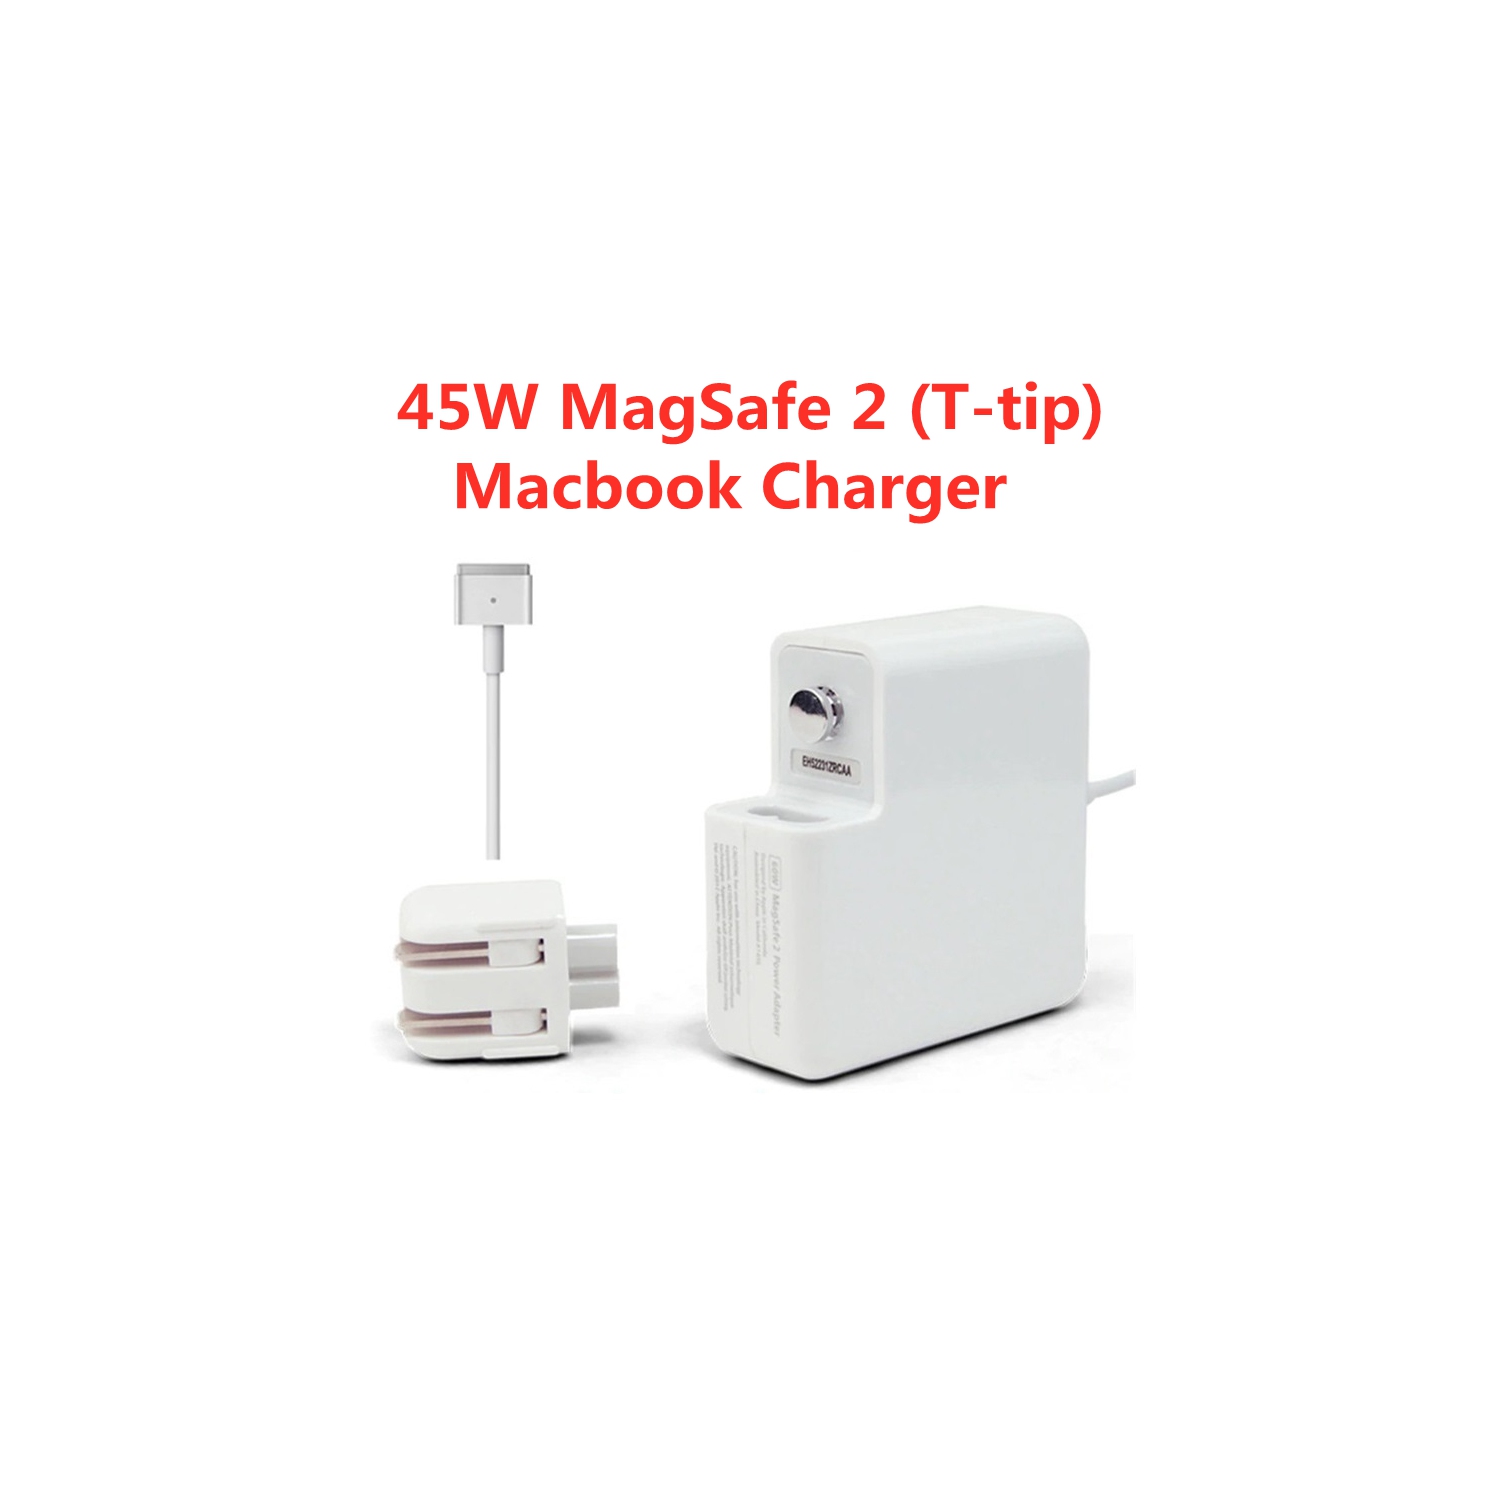 【CSmart】 45W Magsafe 2 Power Adapter Fast Charger T-Tip Magnetic Connector Cable for MacBook Air 11" 2012 2015 13" 2015 2017, A1436